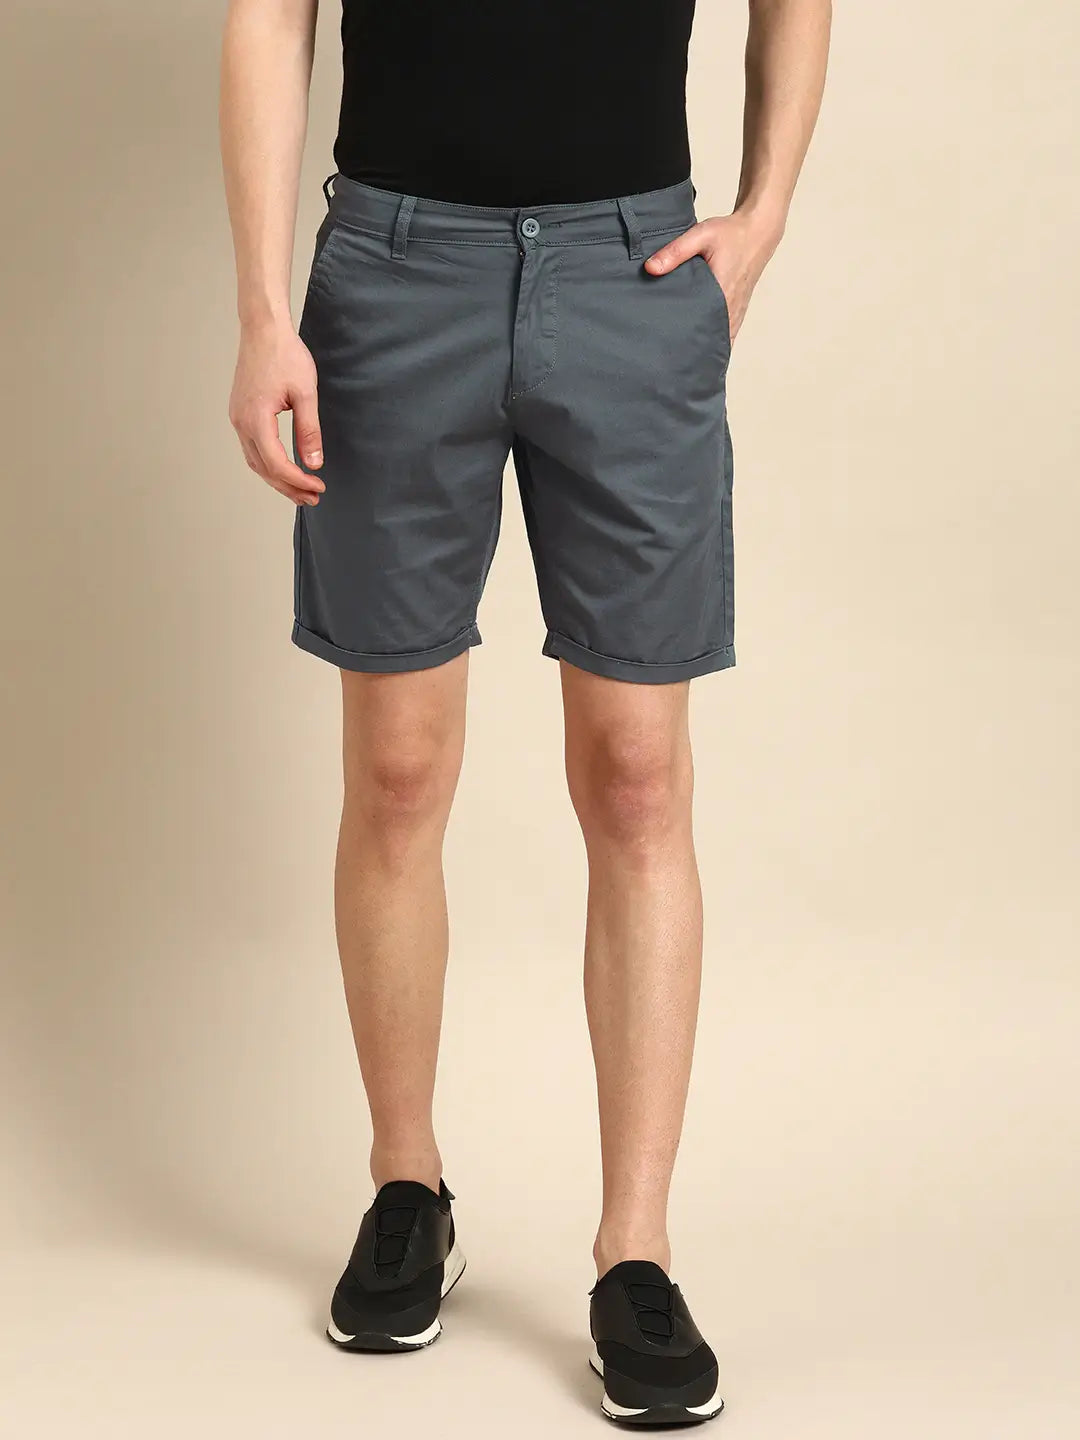 Men Charcoal Gray Solid Slim Fit Chino Shorts - Back View - AceCart